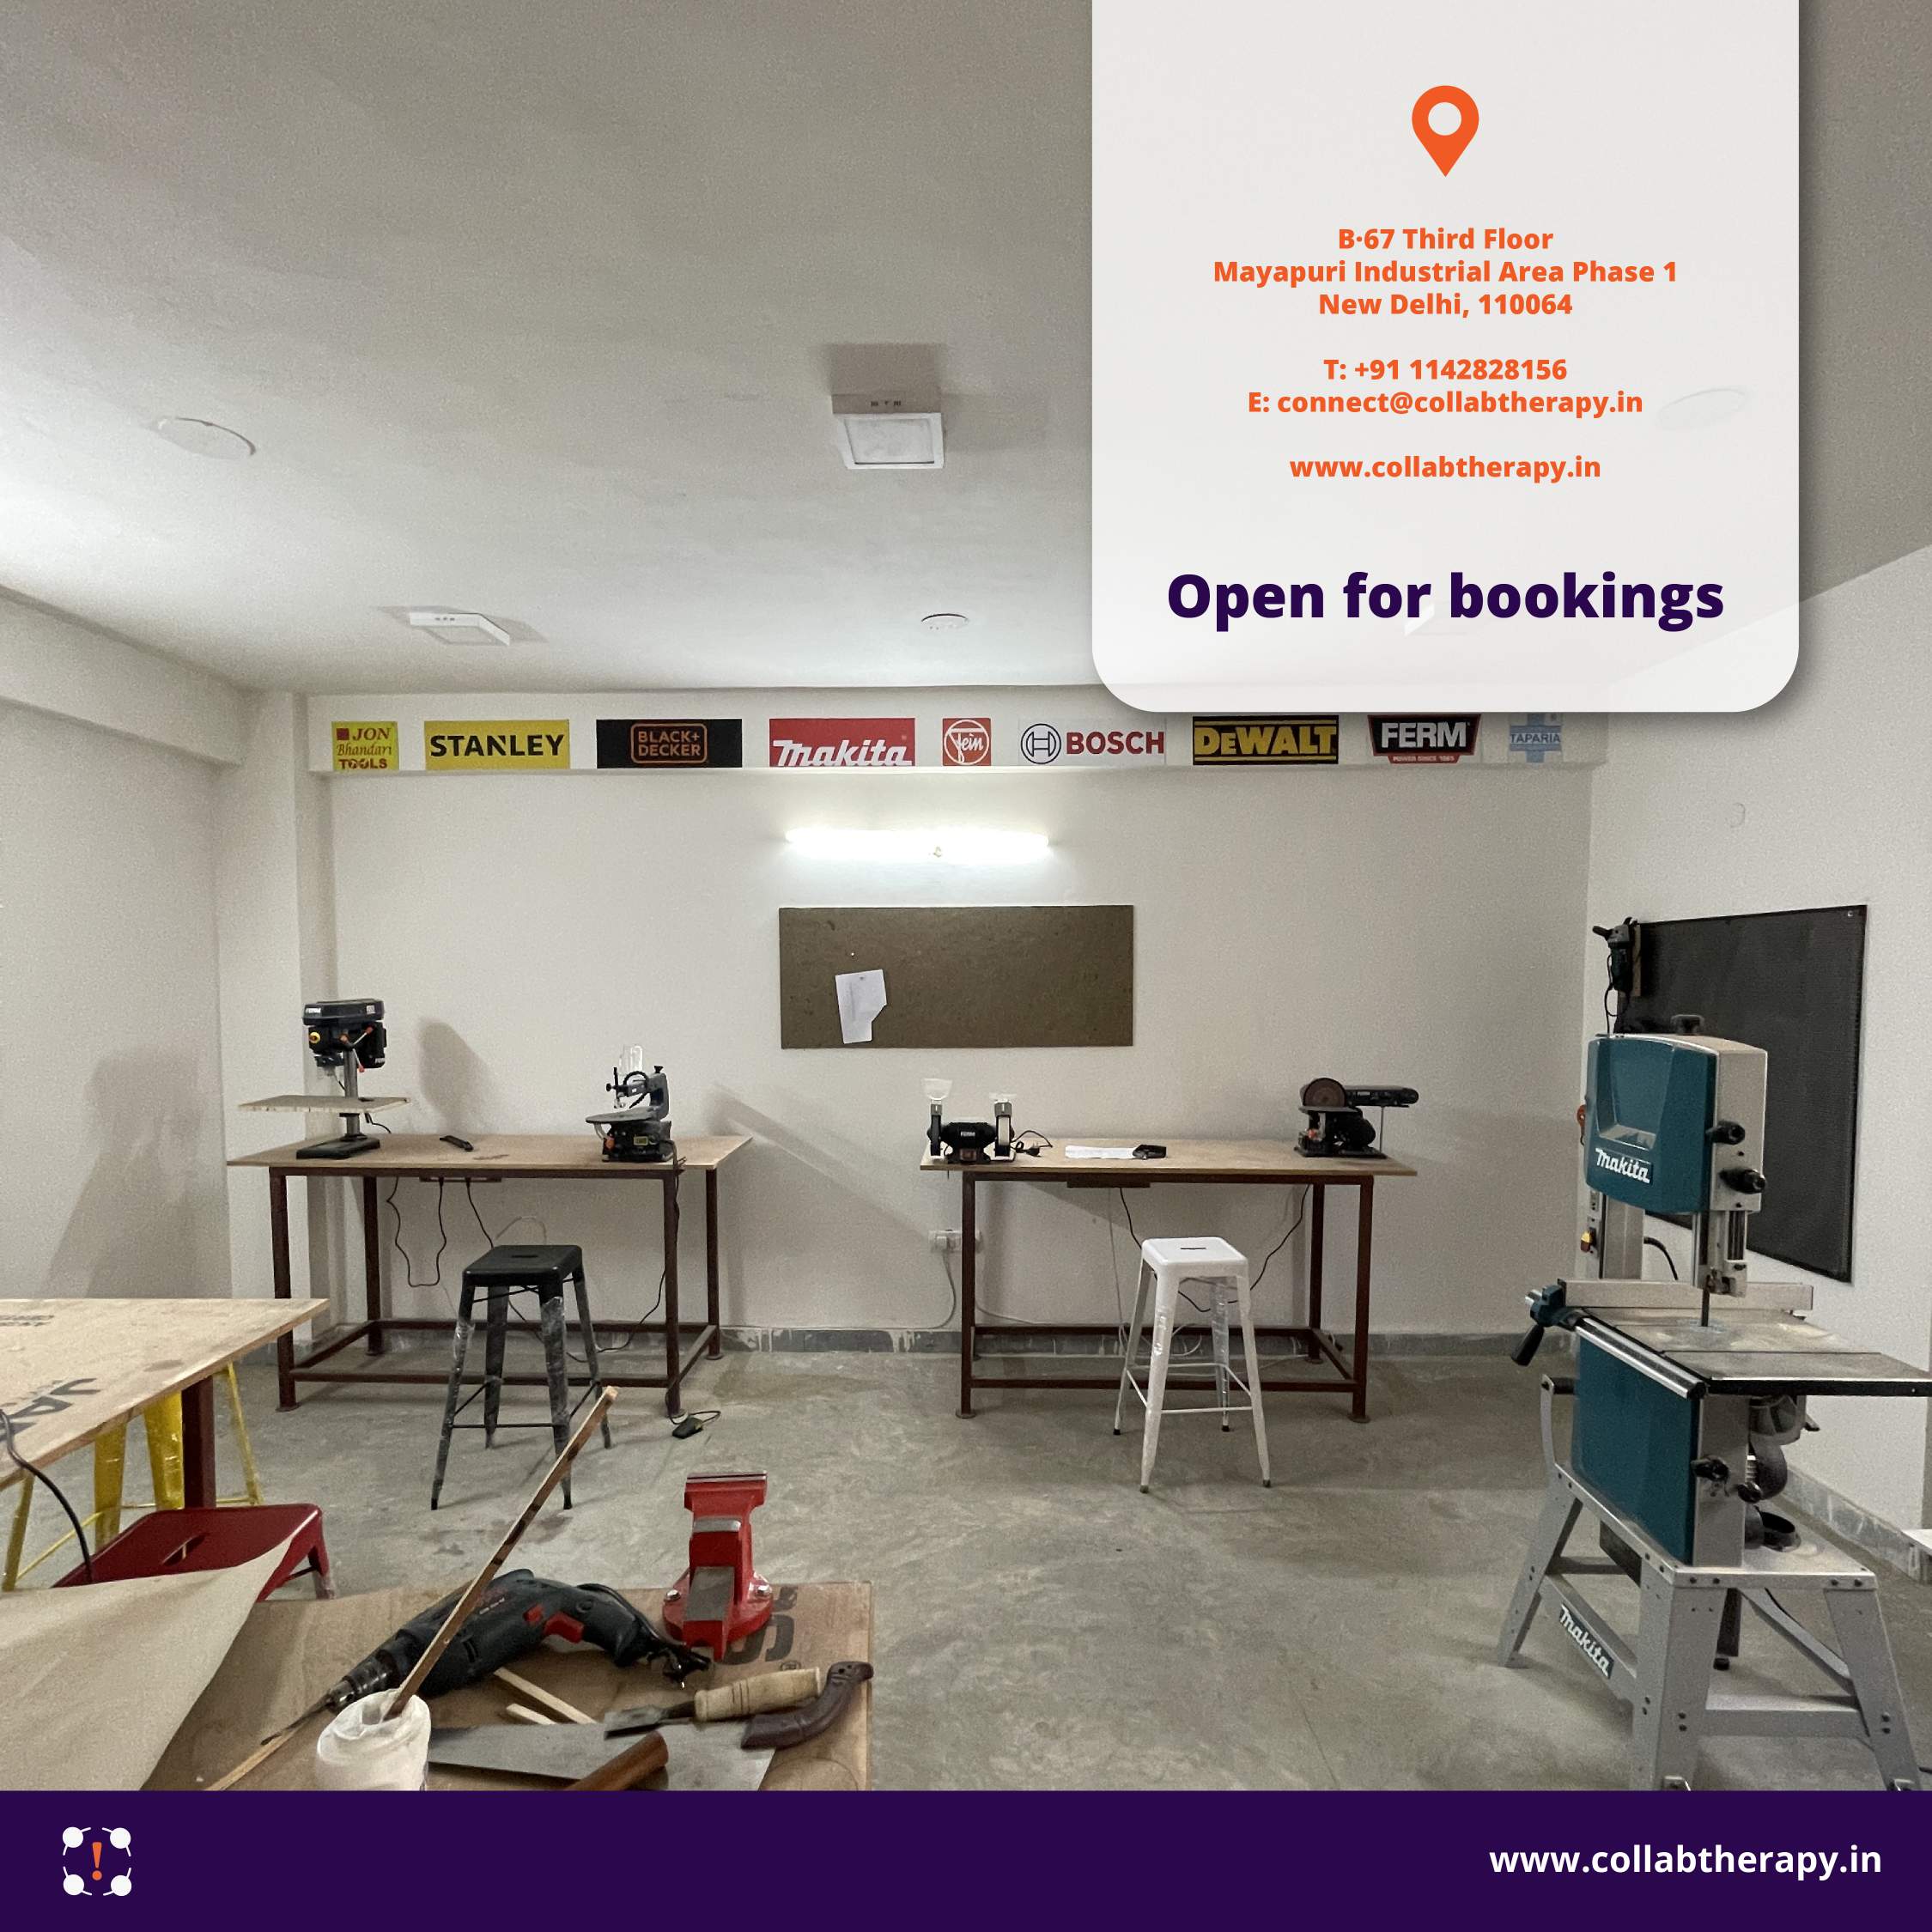 Ideation  Room & Co-working space in Delhi - CollabtherapyServicesAdvertising - DesignWest DelhiOther